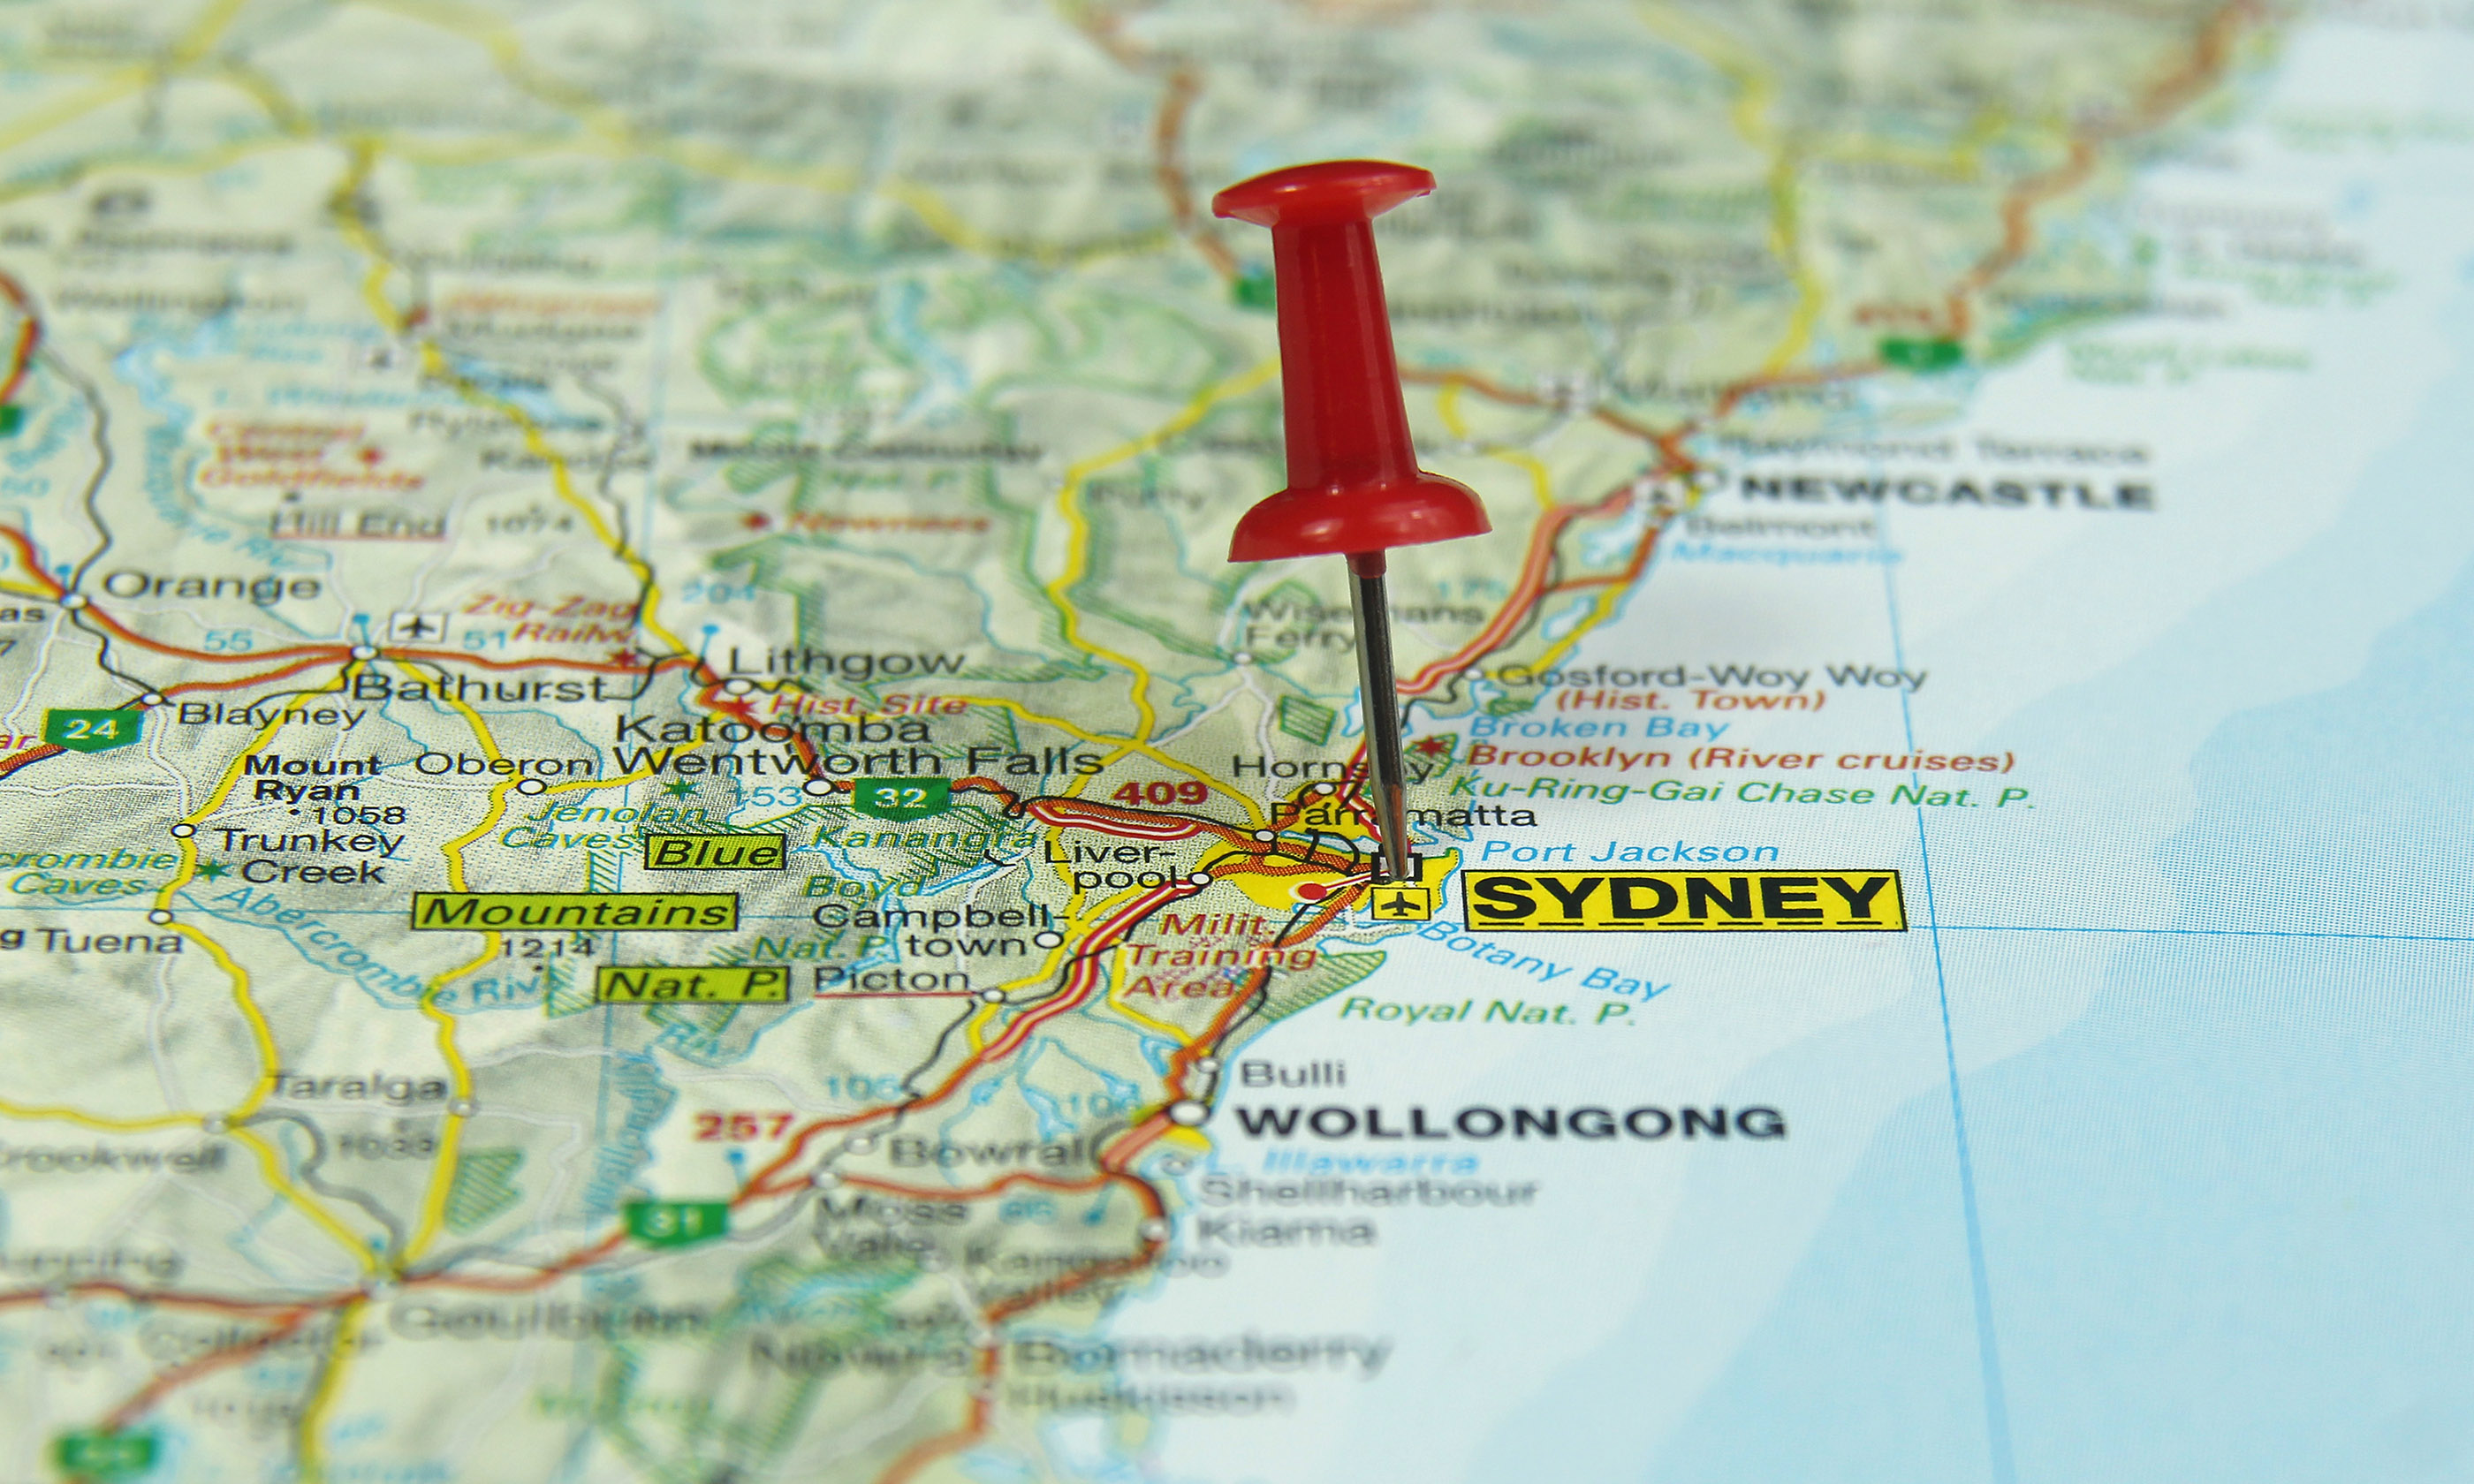 Sydney on a map (Shutterstock: see main credit below)